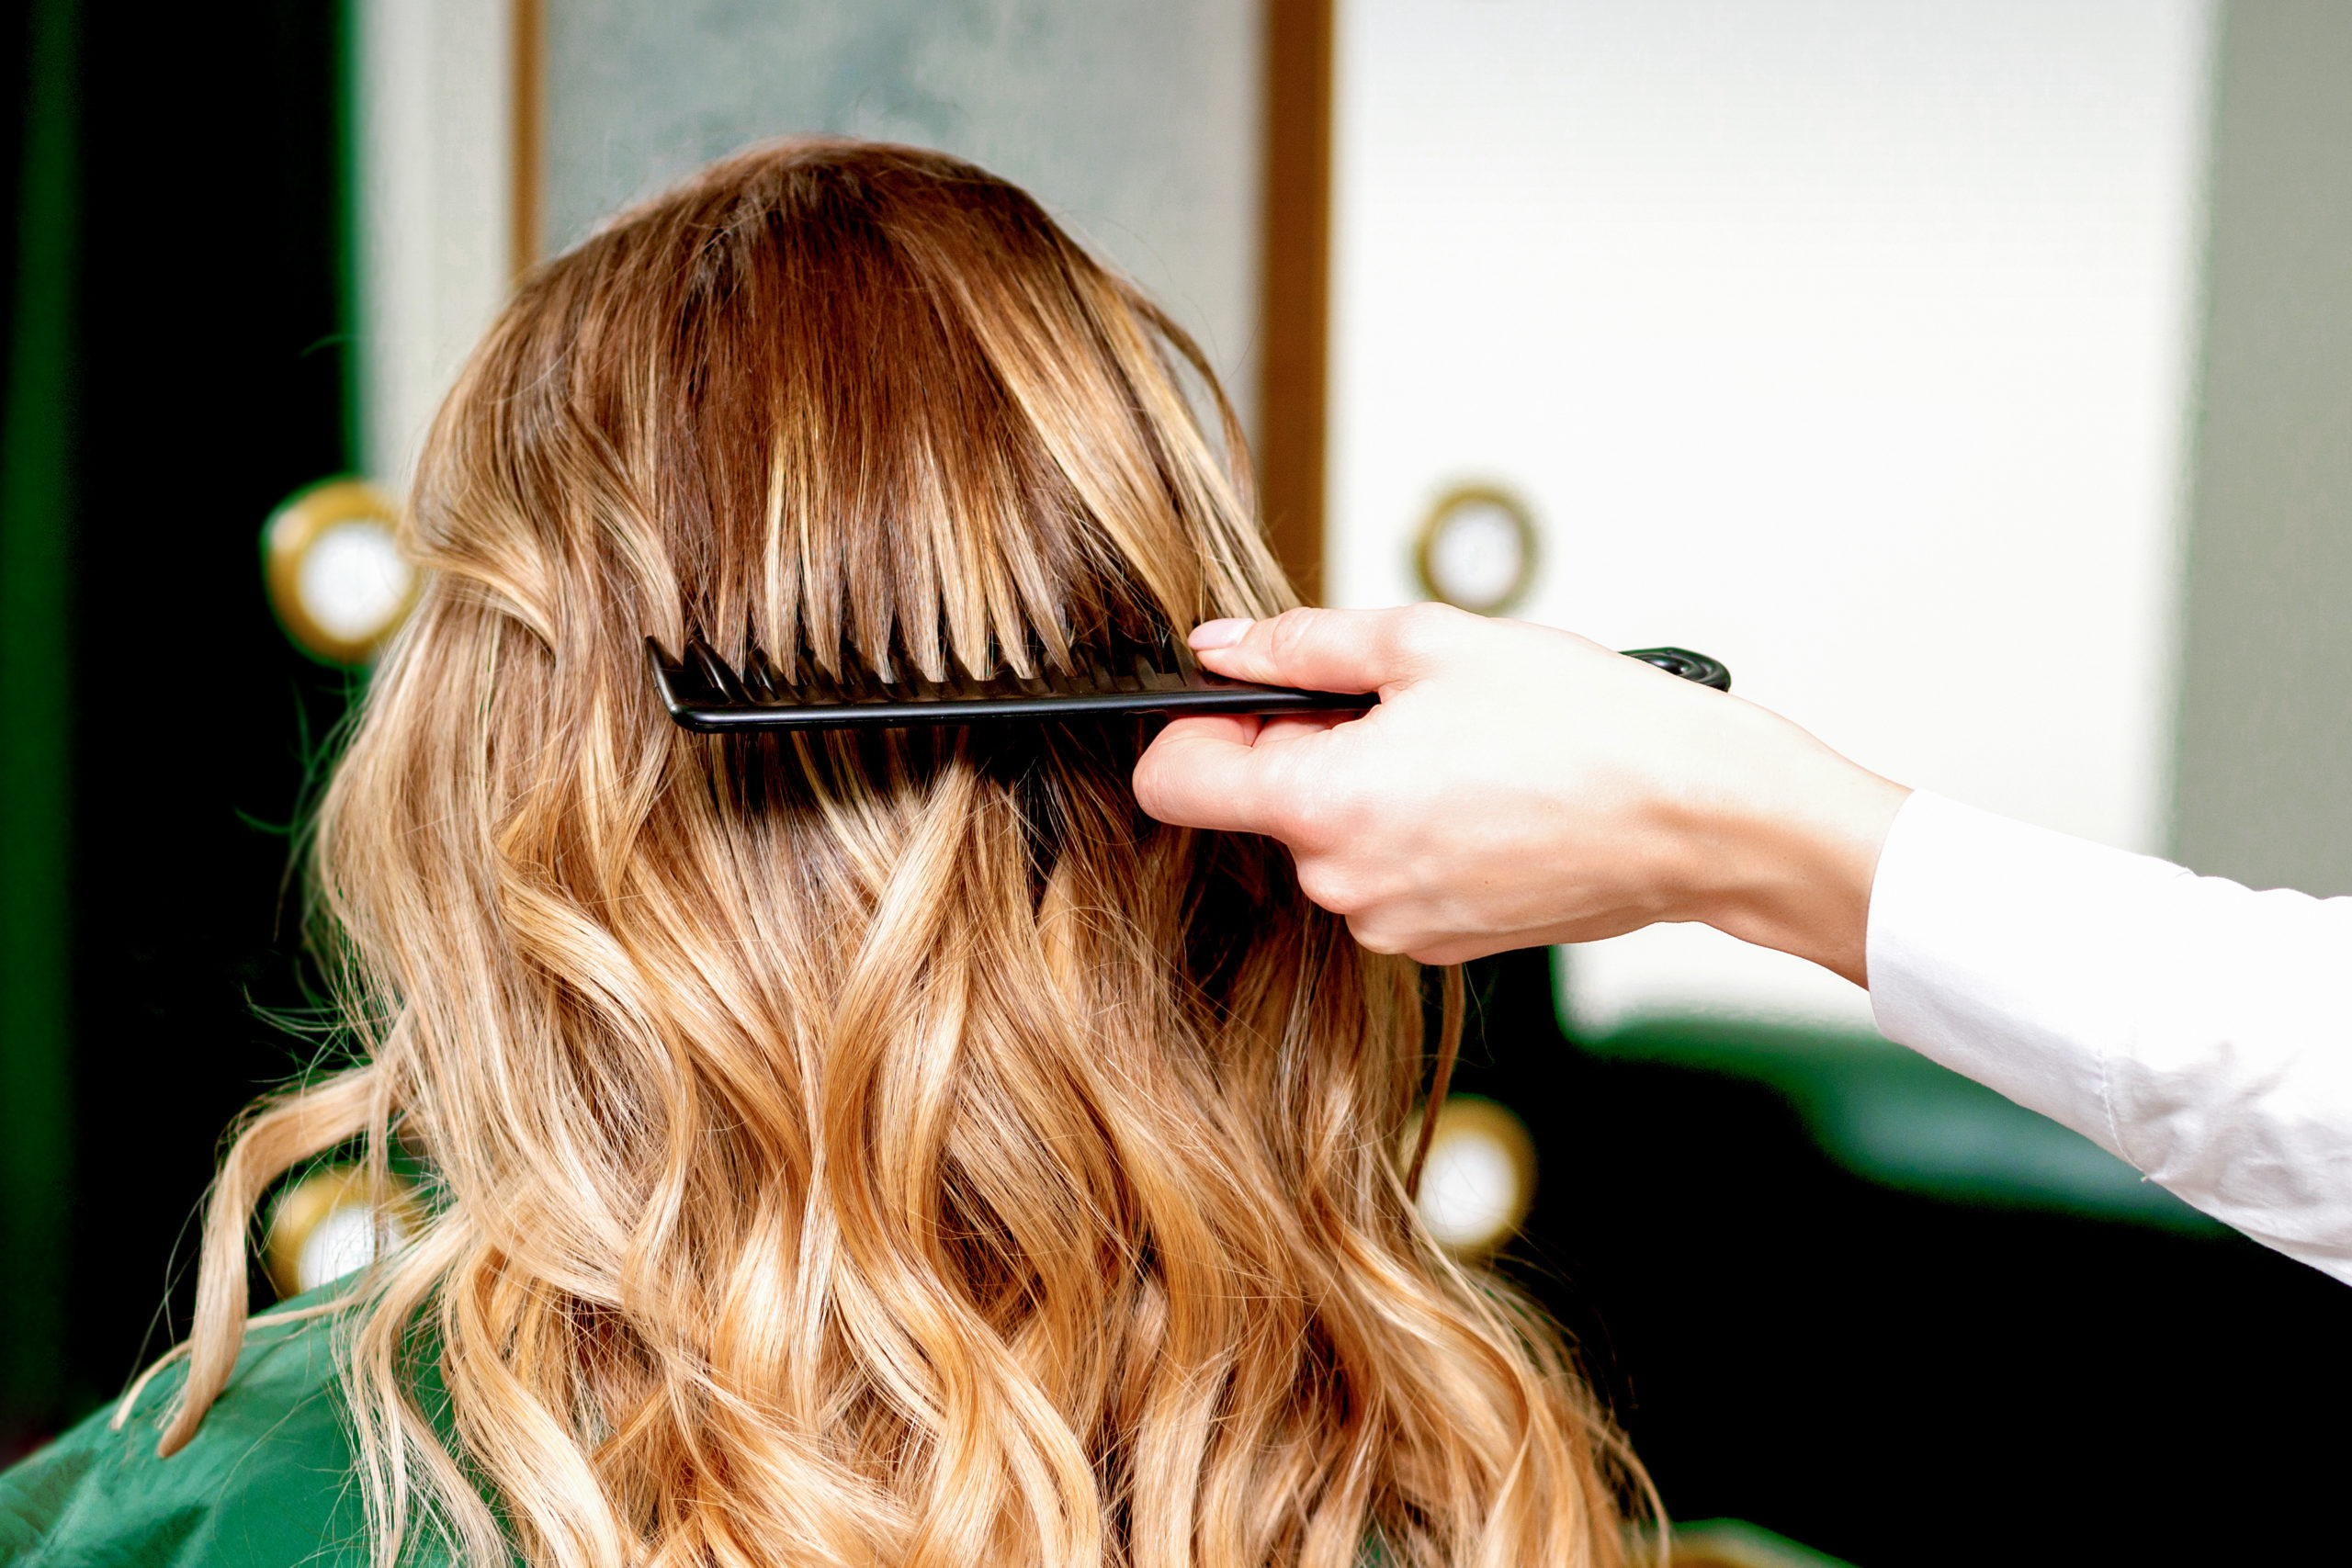 Prep for Spring Break with this Expert Hair Salon in Garland
